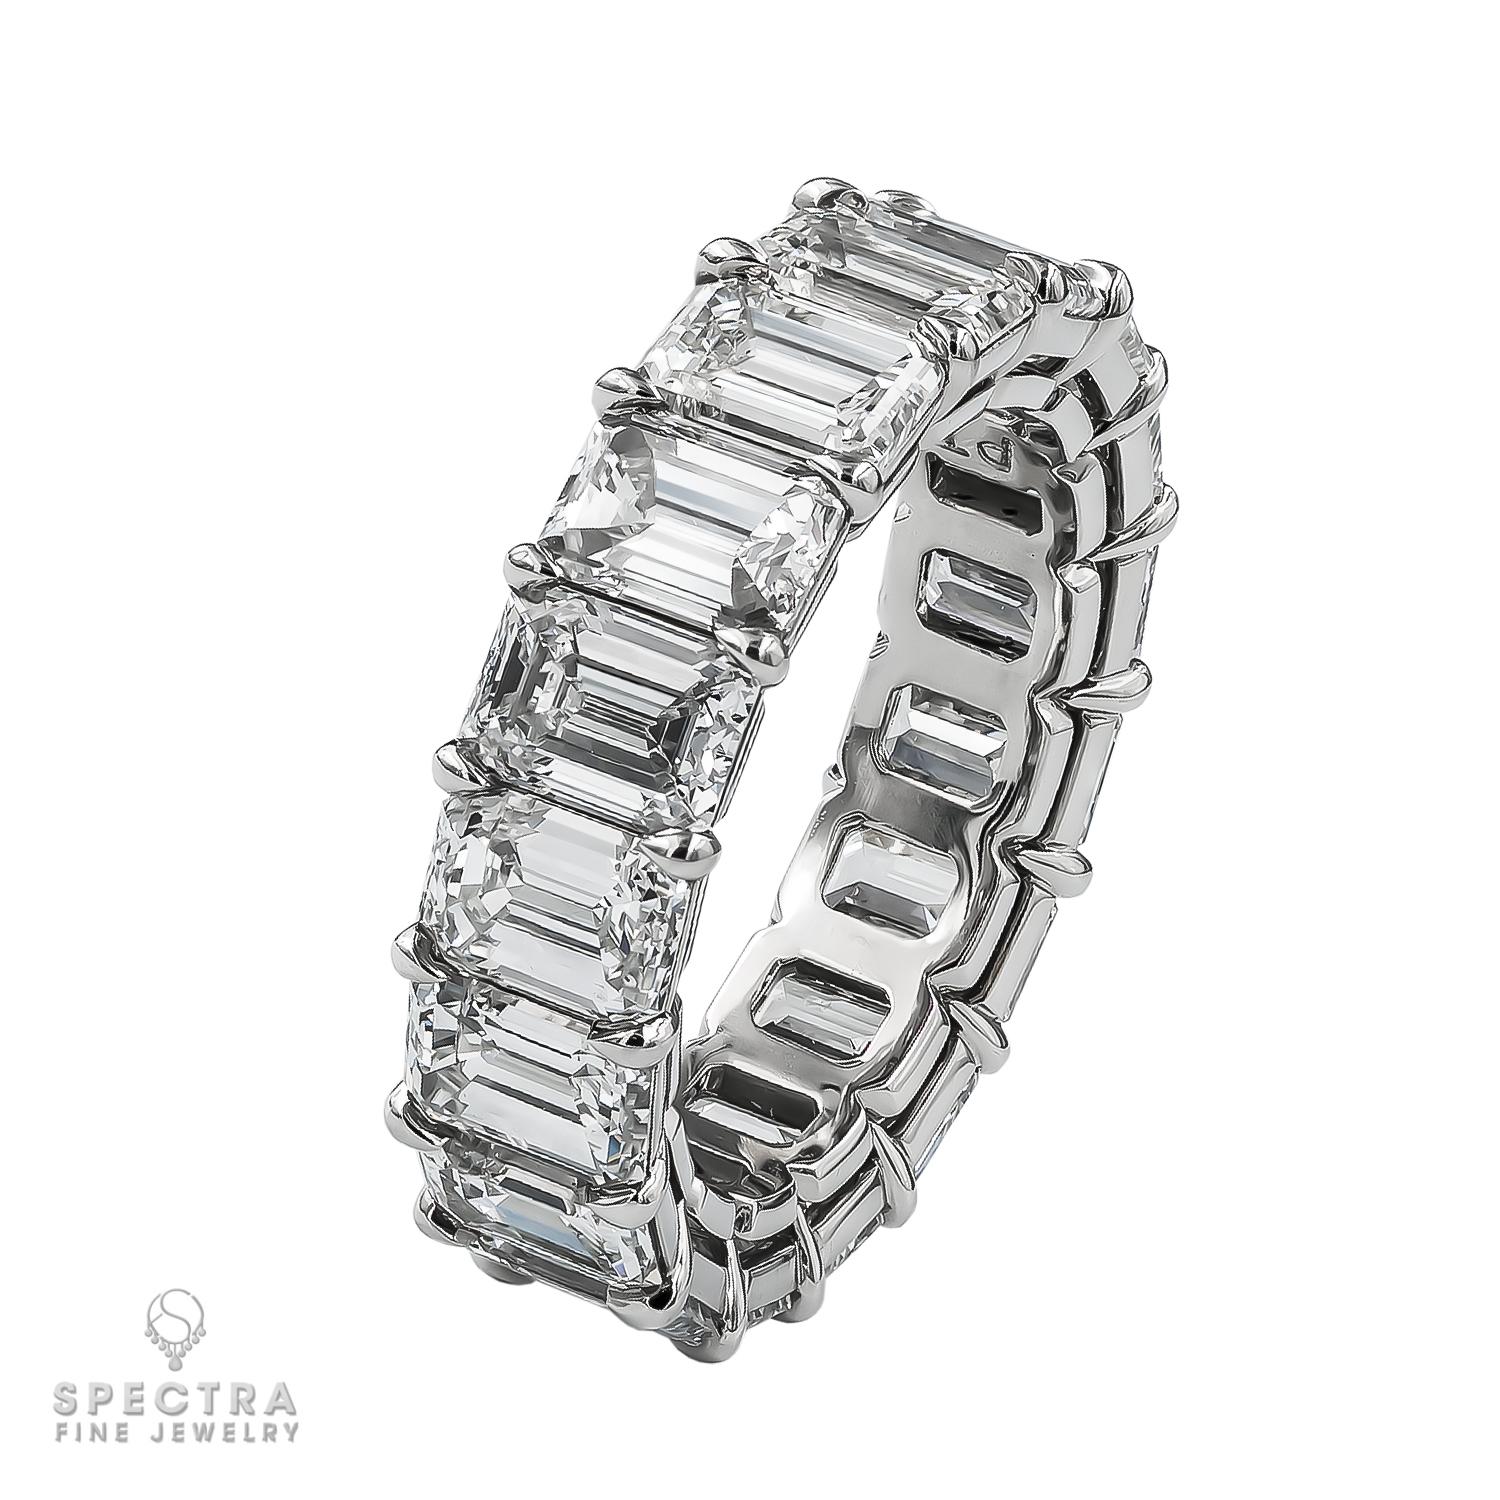 A classy eternity/wedding ring comprising of 17 emerald-cut diamonds weighing a total of 9.01 carats.
Each diamond is 0.53 carats average.
All diamonds are certified by GIA, G-H-I color, IF-VS1 clarity.
Metal is platinum, gross weight 7.52gr.
Size